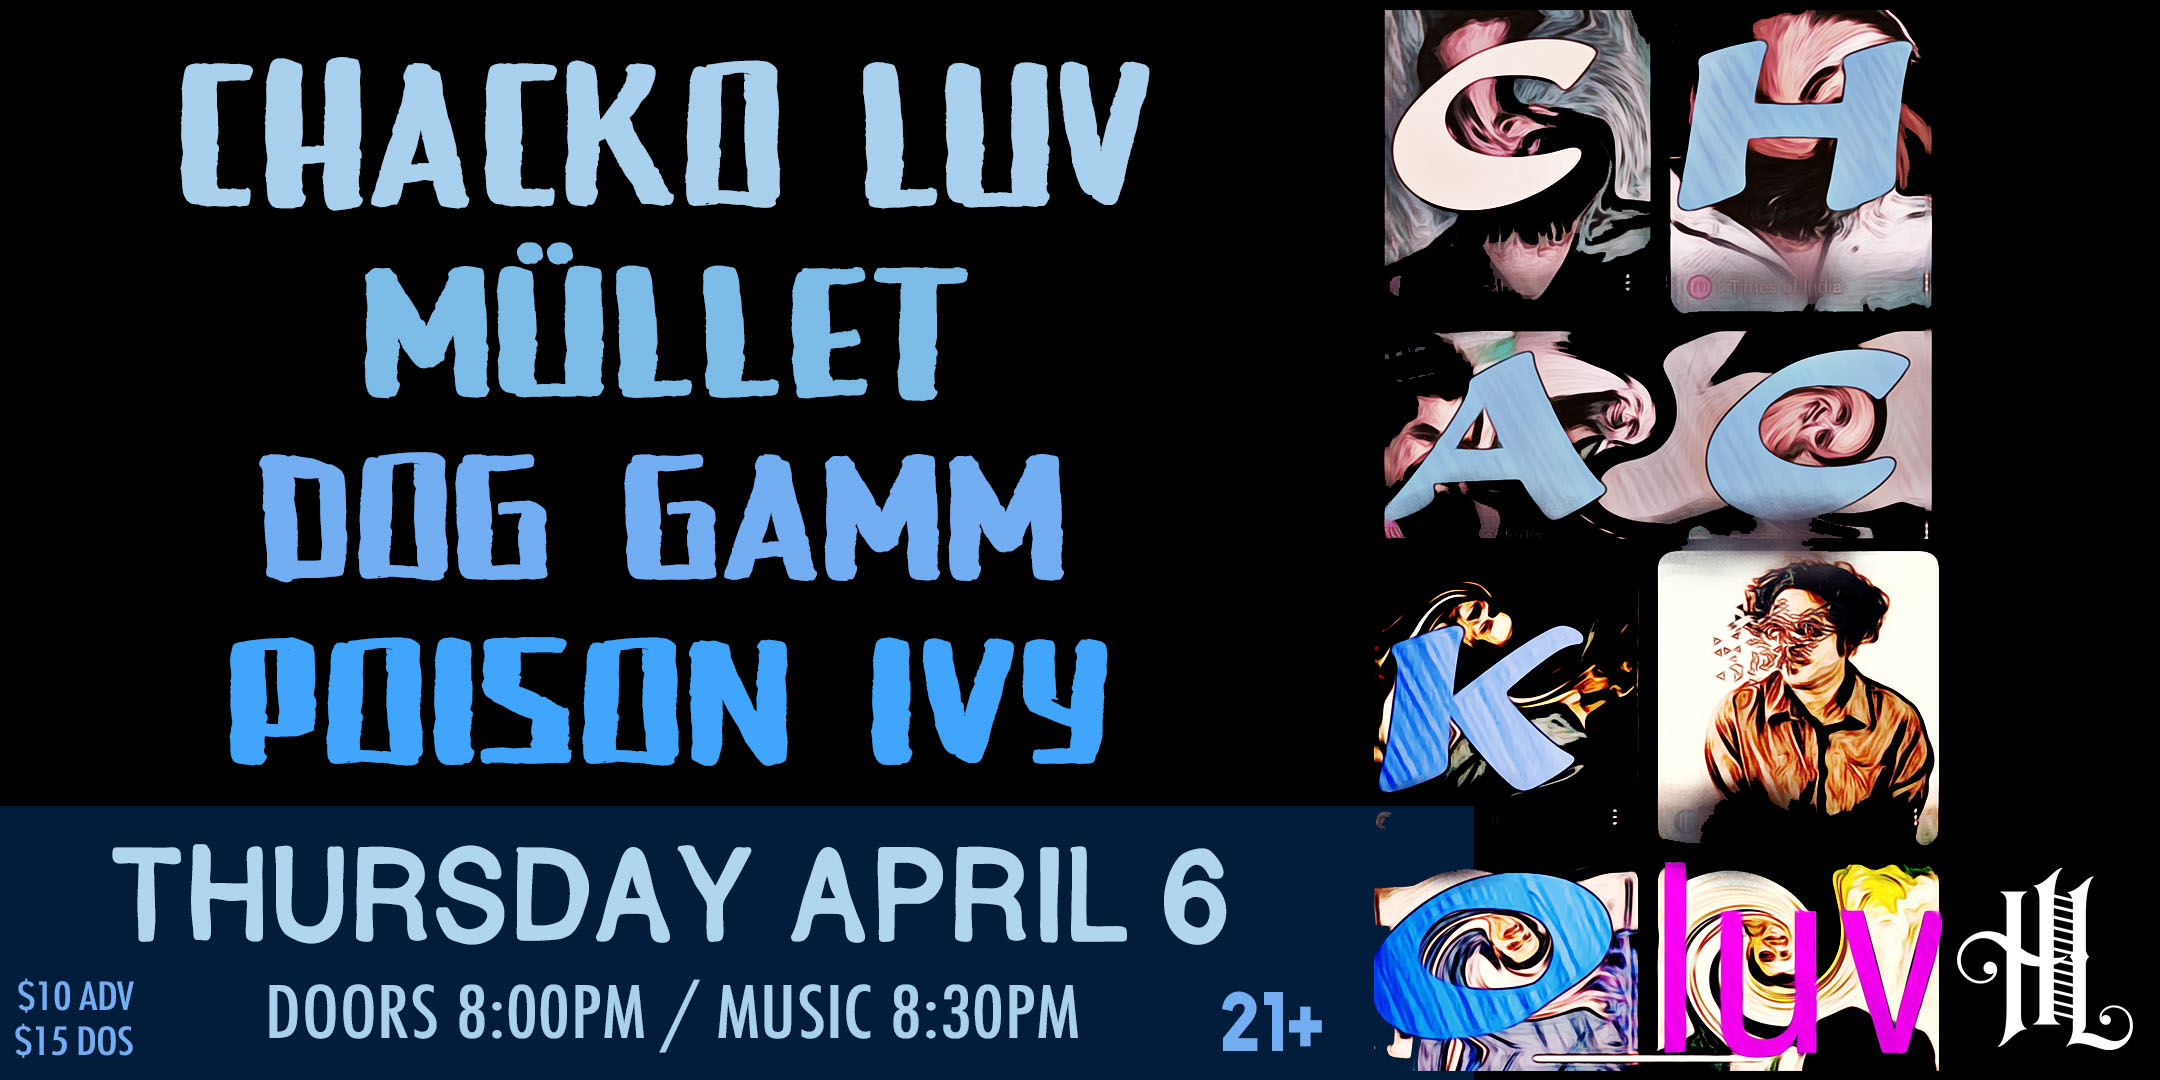 CHACKO LUV MüLLET Dog Gamm Poison Ivy Thursday April 6 The Hook and Ladder Theater Doors 8:00pm :: Music 8:30pm :: 21+ General Admission $10 ADV / $15 DOS NO REFUNDS